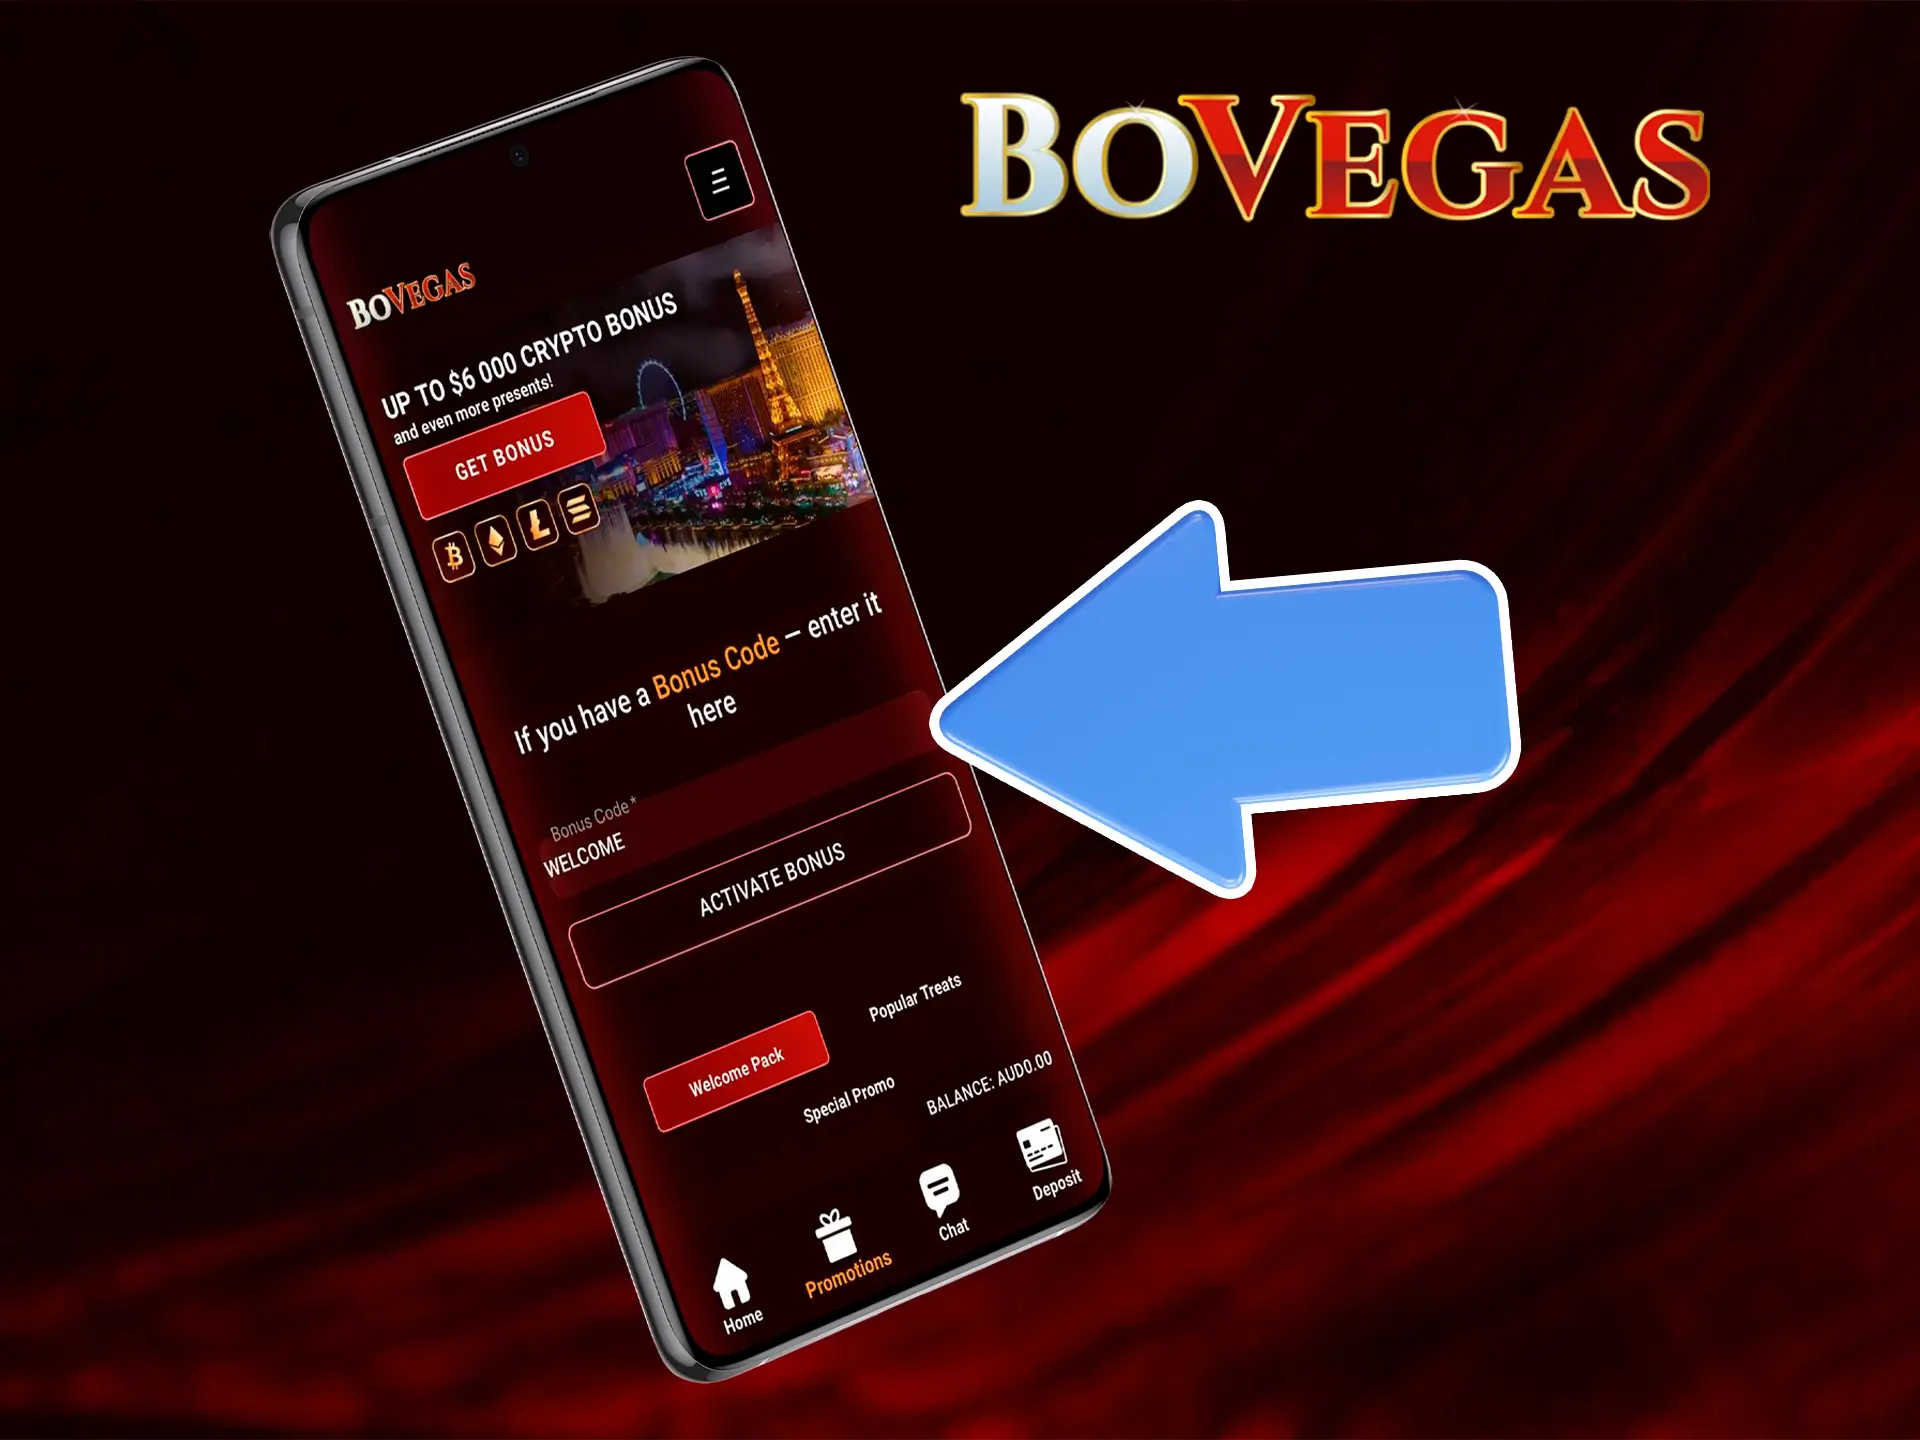 Australian users can also use the BoVegas casino promo codes in the mobile app.